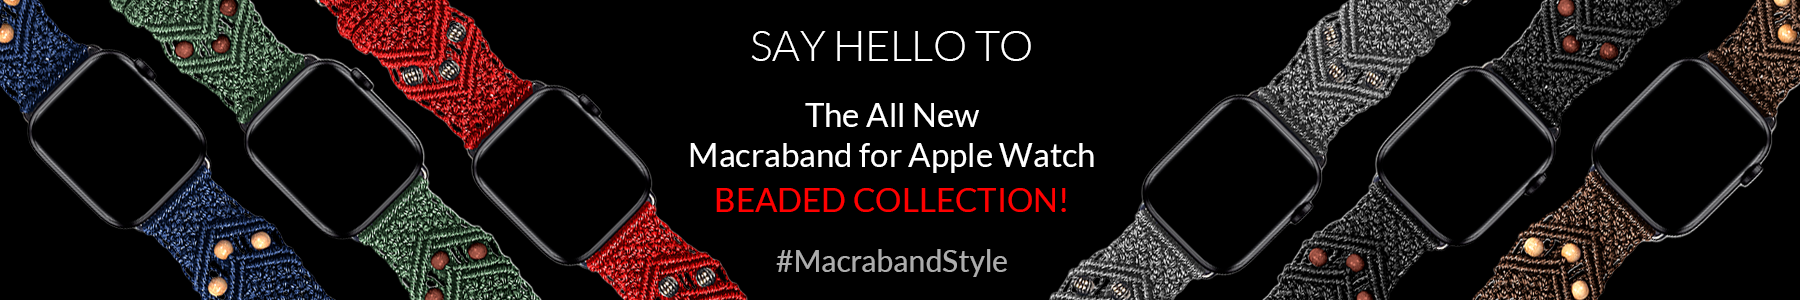 Macraband for Apple Watch 308 Collection